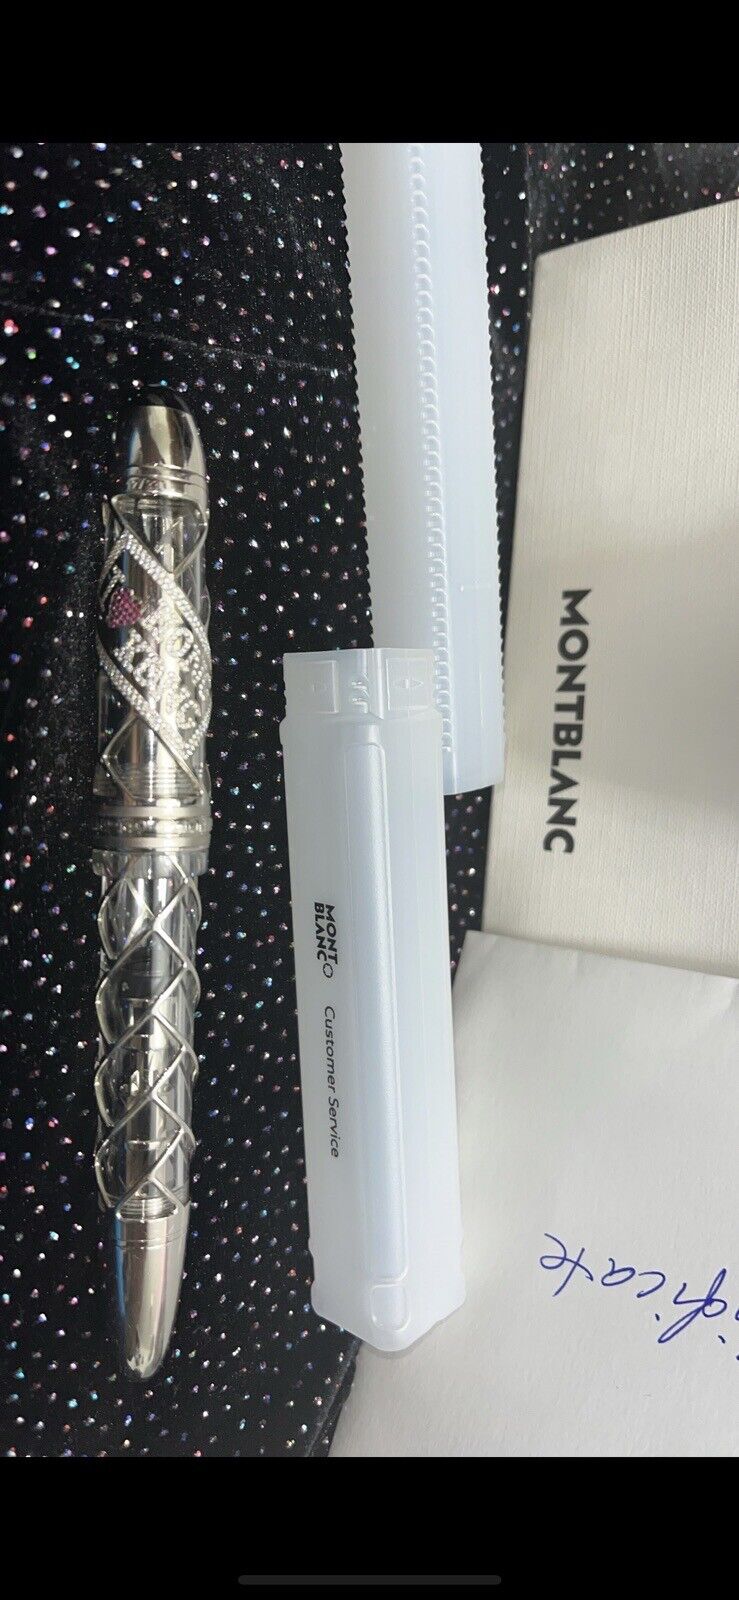 MONTBLANC 12/33 LIMITED EDITION I LOVE HONG KONG FOUNTAIN PEN 2003